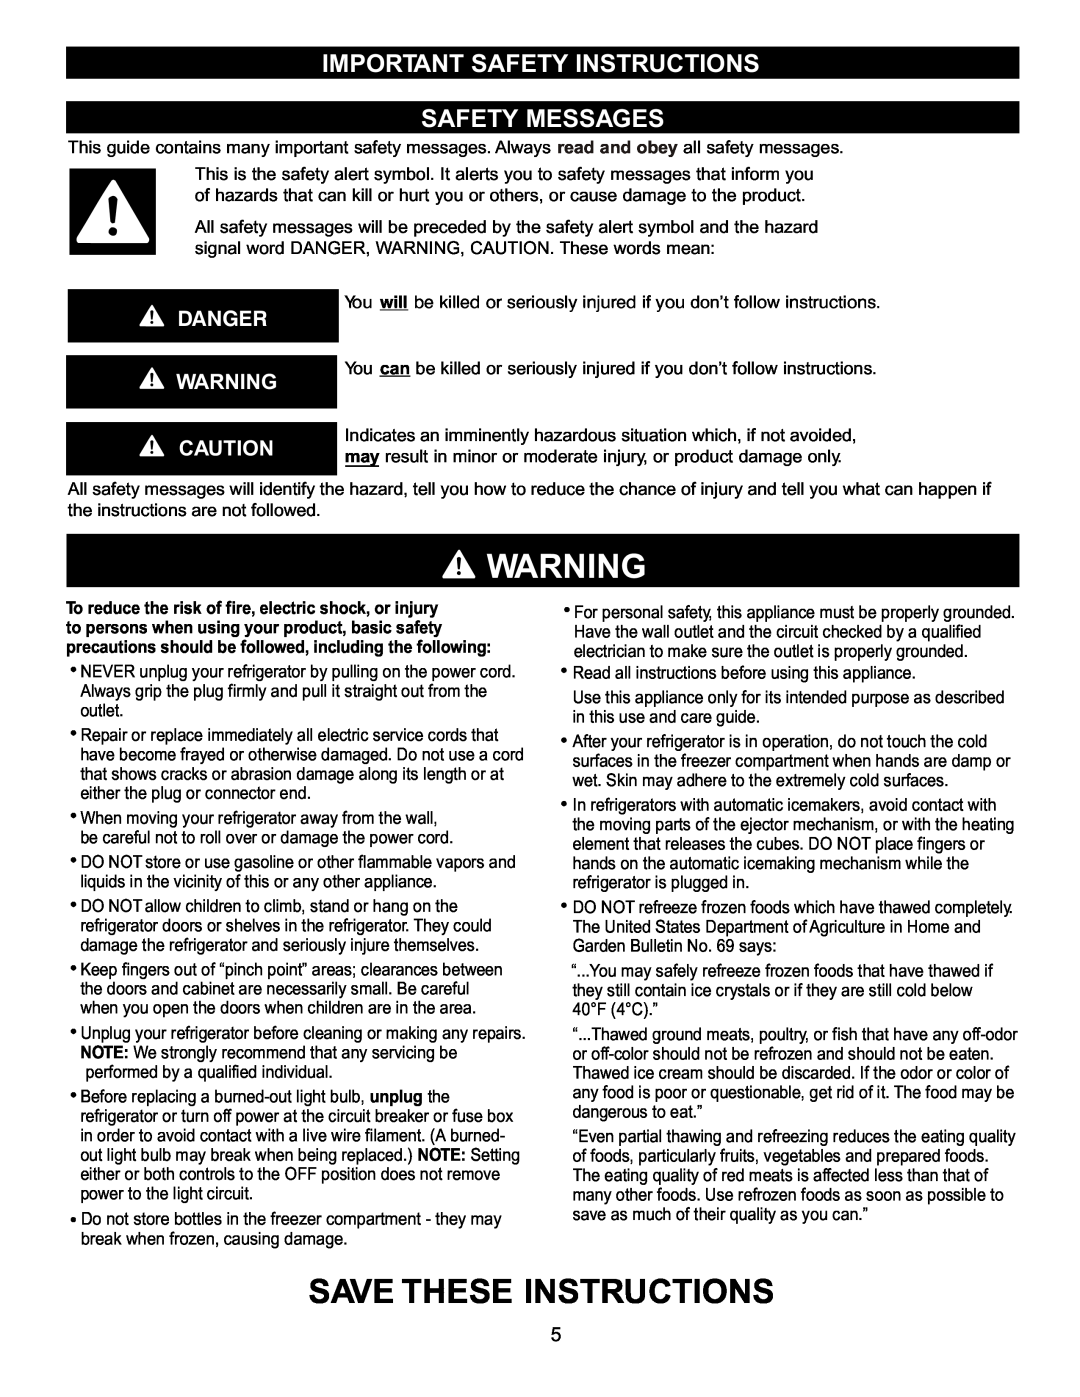 LG Electronics LBC2252, LRBC2051, LDC2272 Important Safety Instructions Safety Messages, Danger, Save These Instructions 